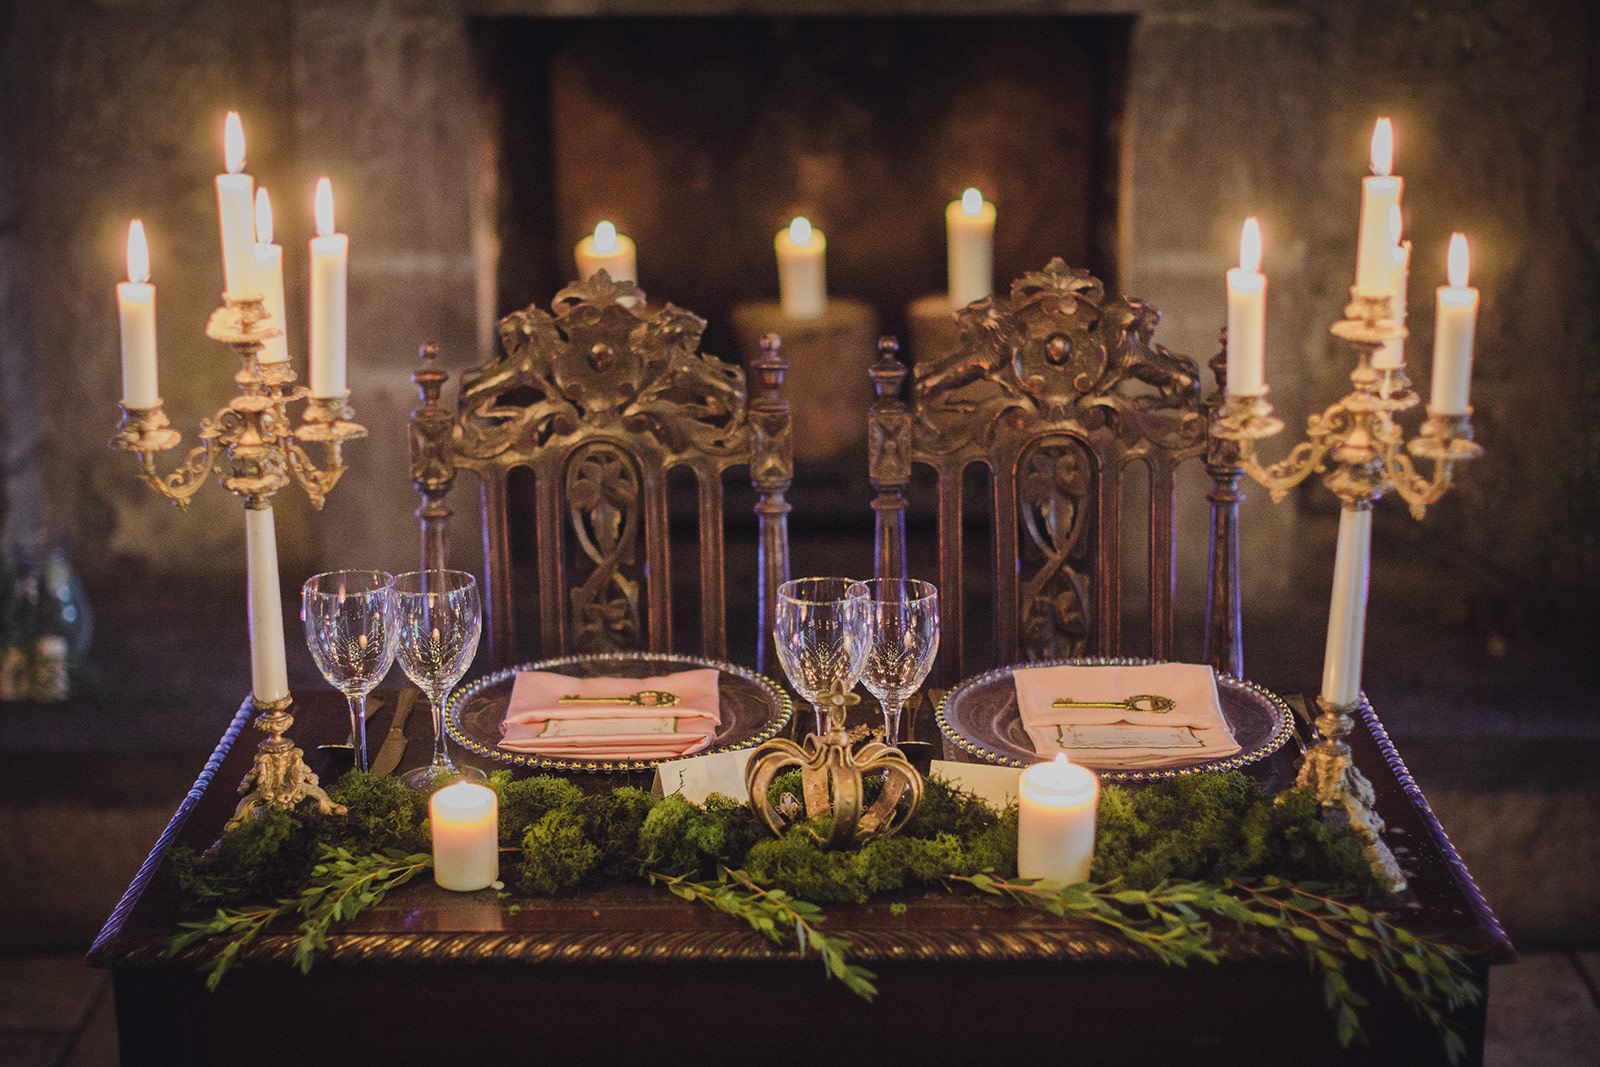 A table set with candles and plates in front of a fireplace.